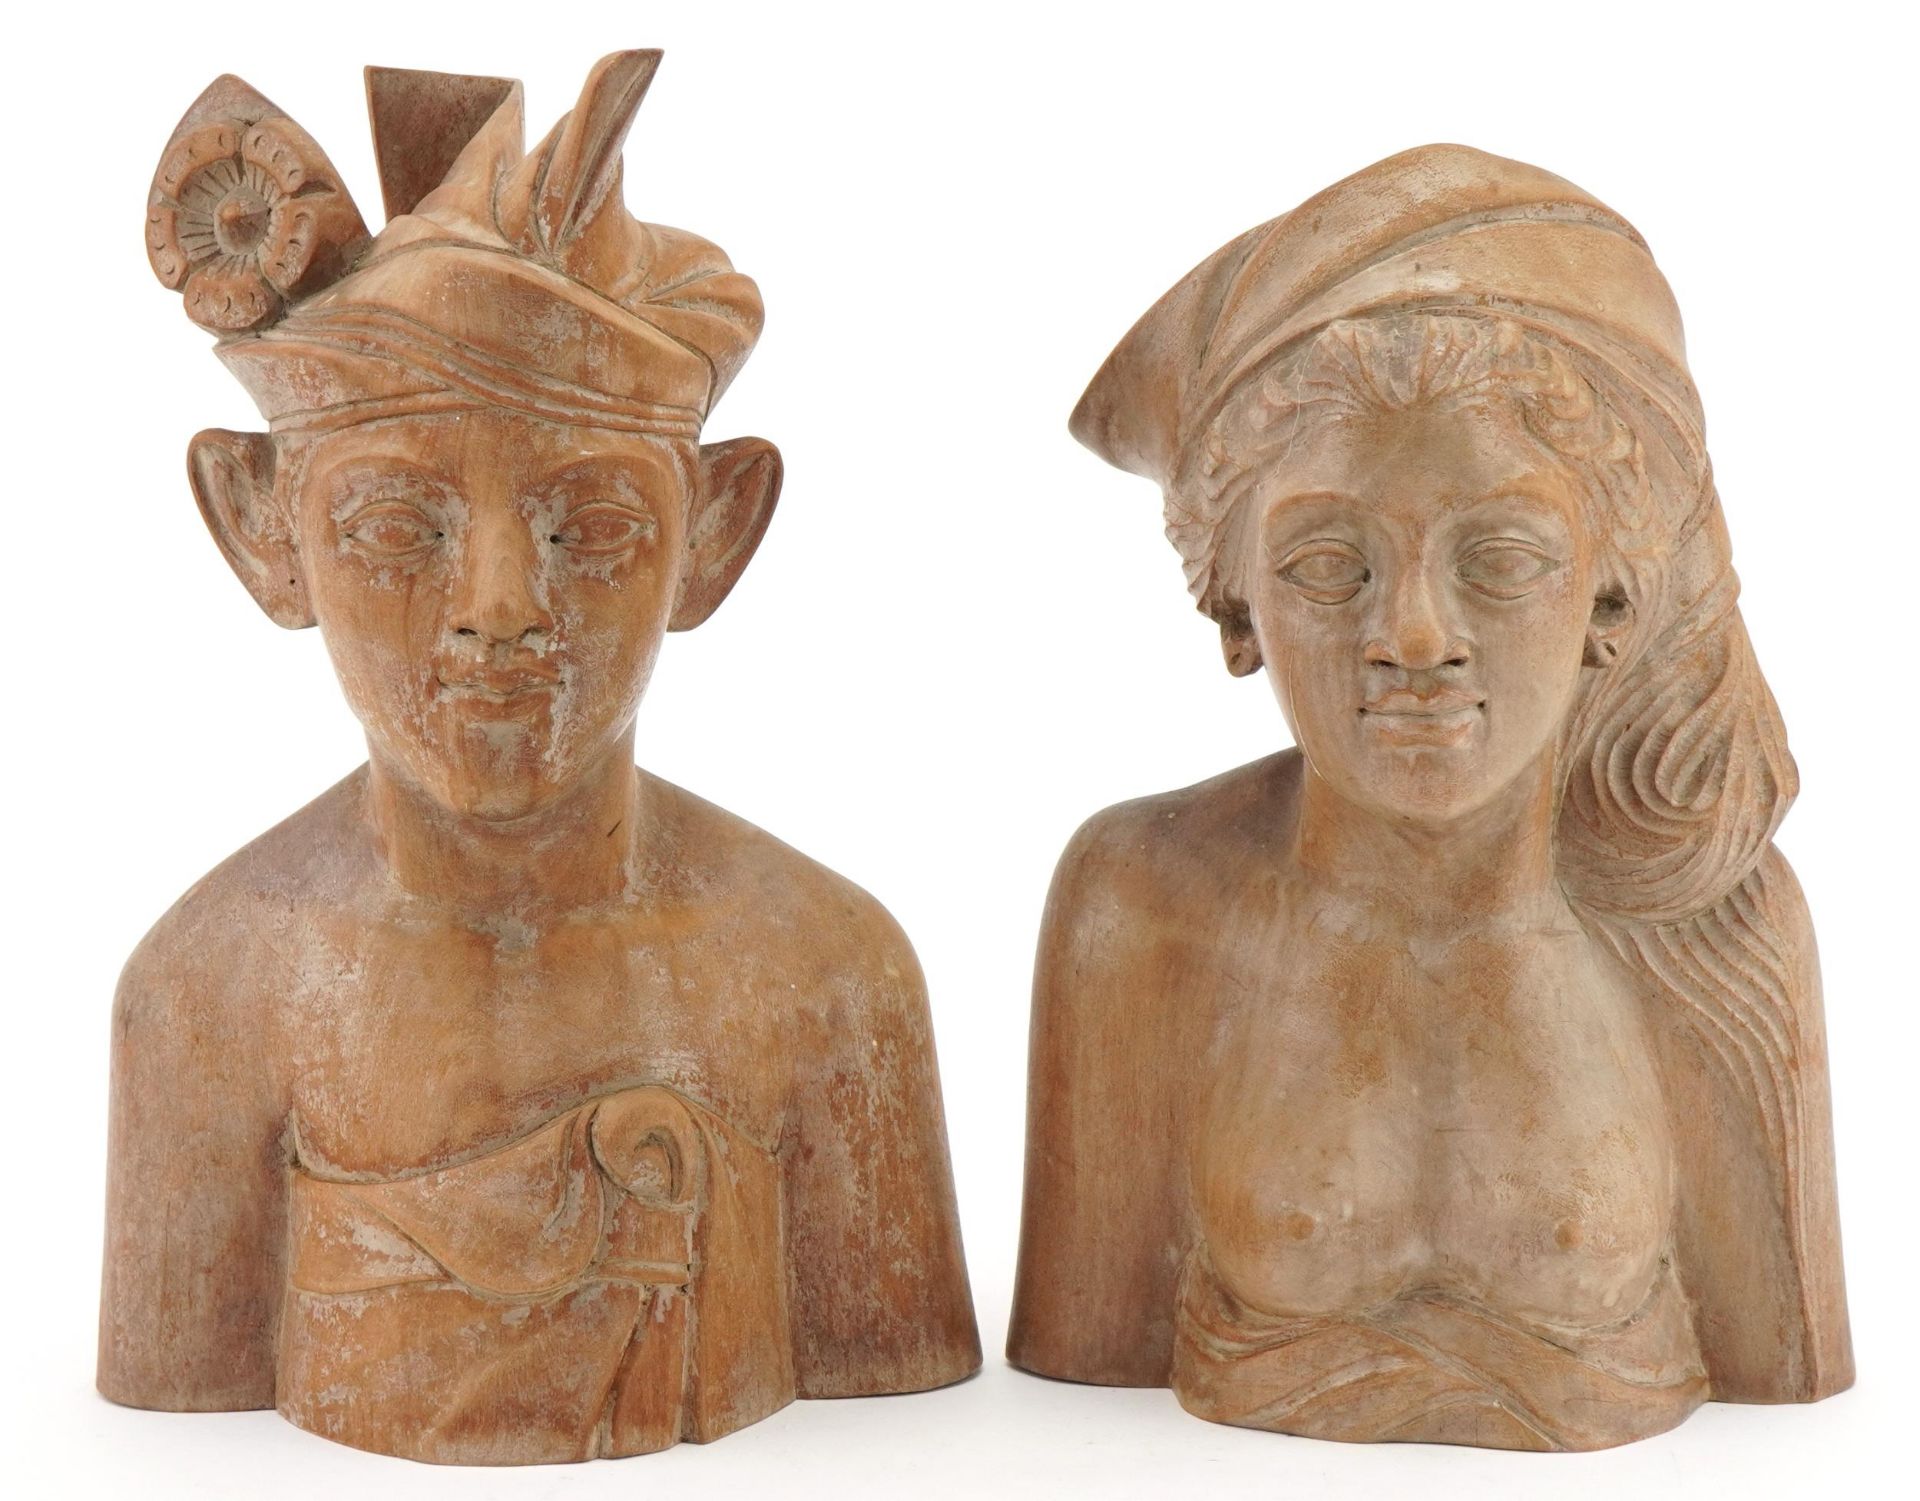 Two Balinese carved wood busts, the largest 24cm high : For further information on this lot please